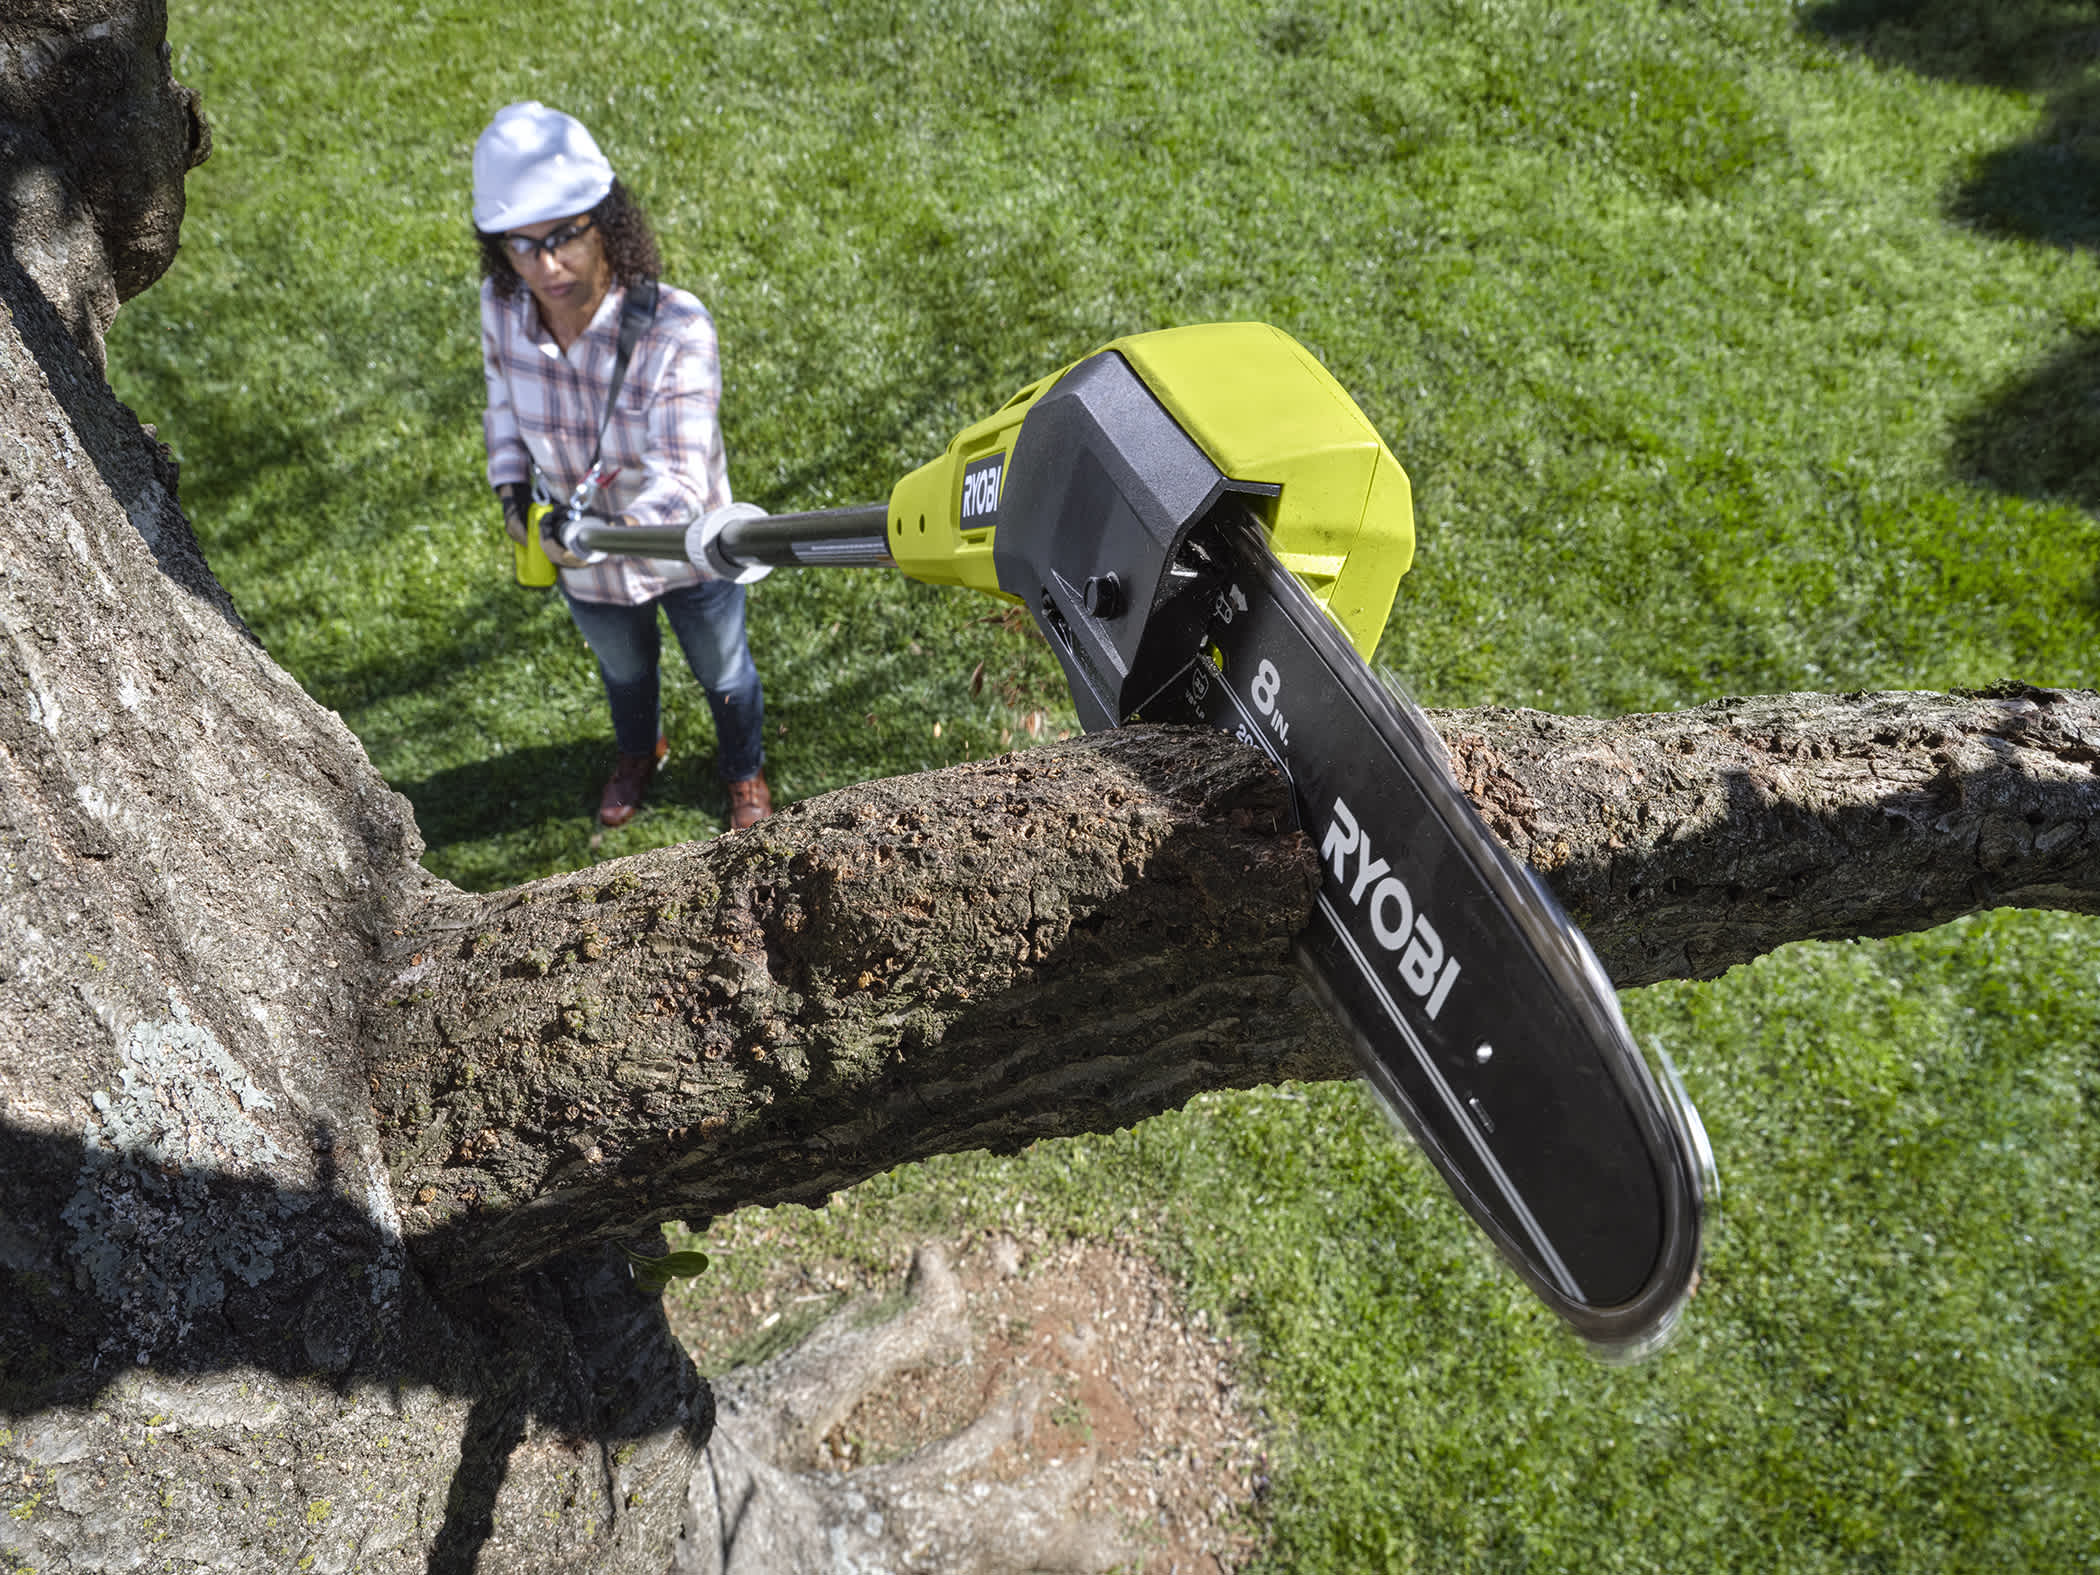 Product Features Image for 18V ONE+ 8" POLE SAW & 8" PRUNING SAW COMBO KIT.